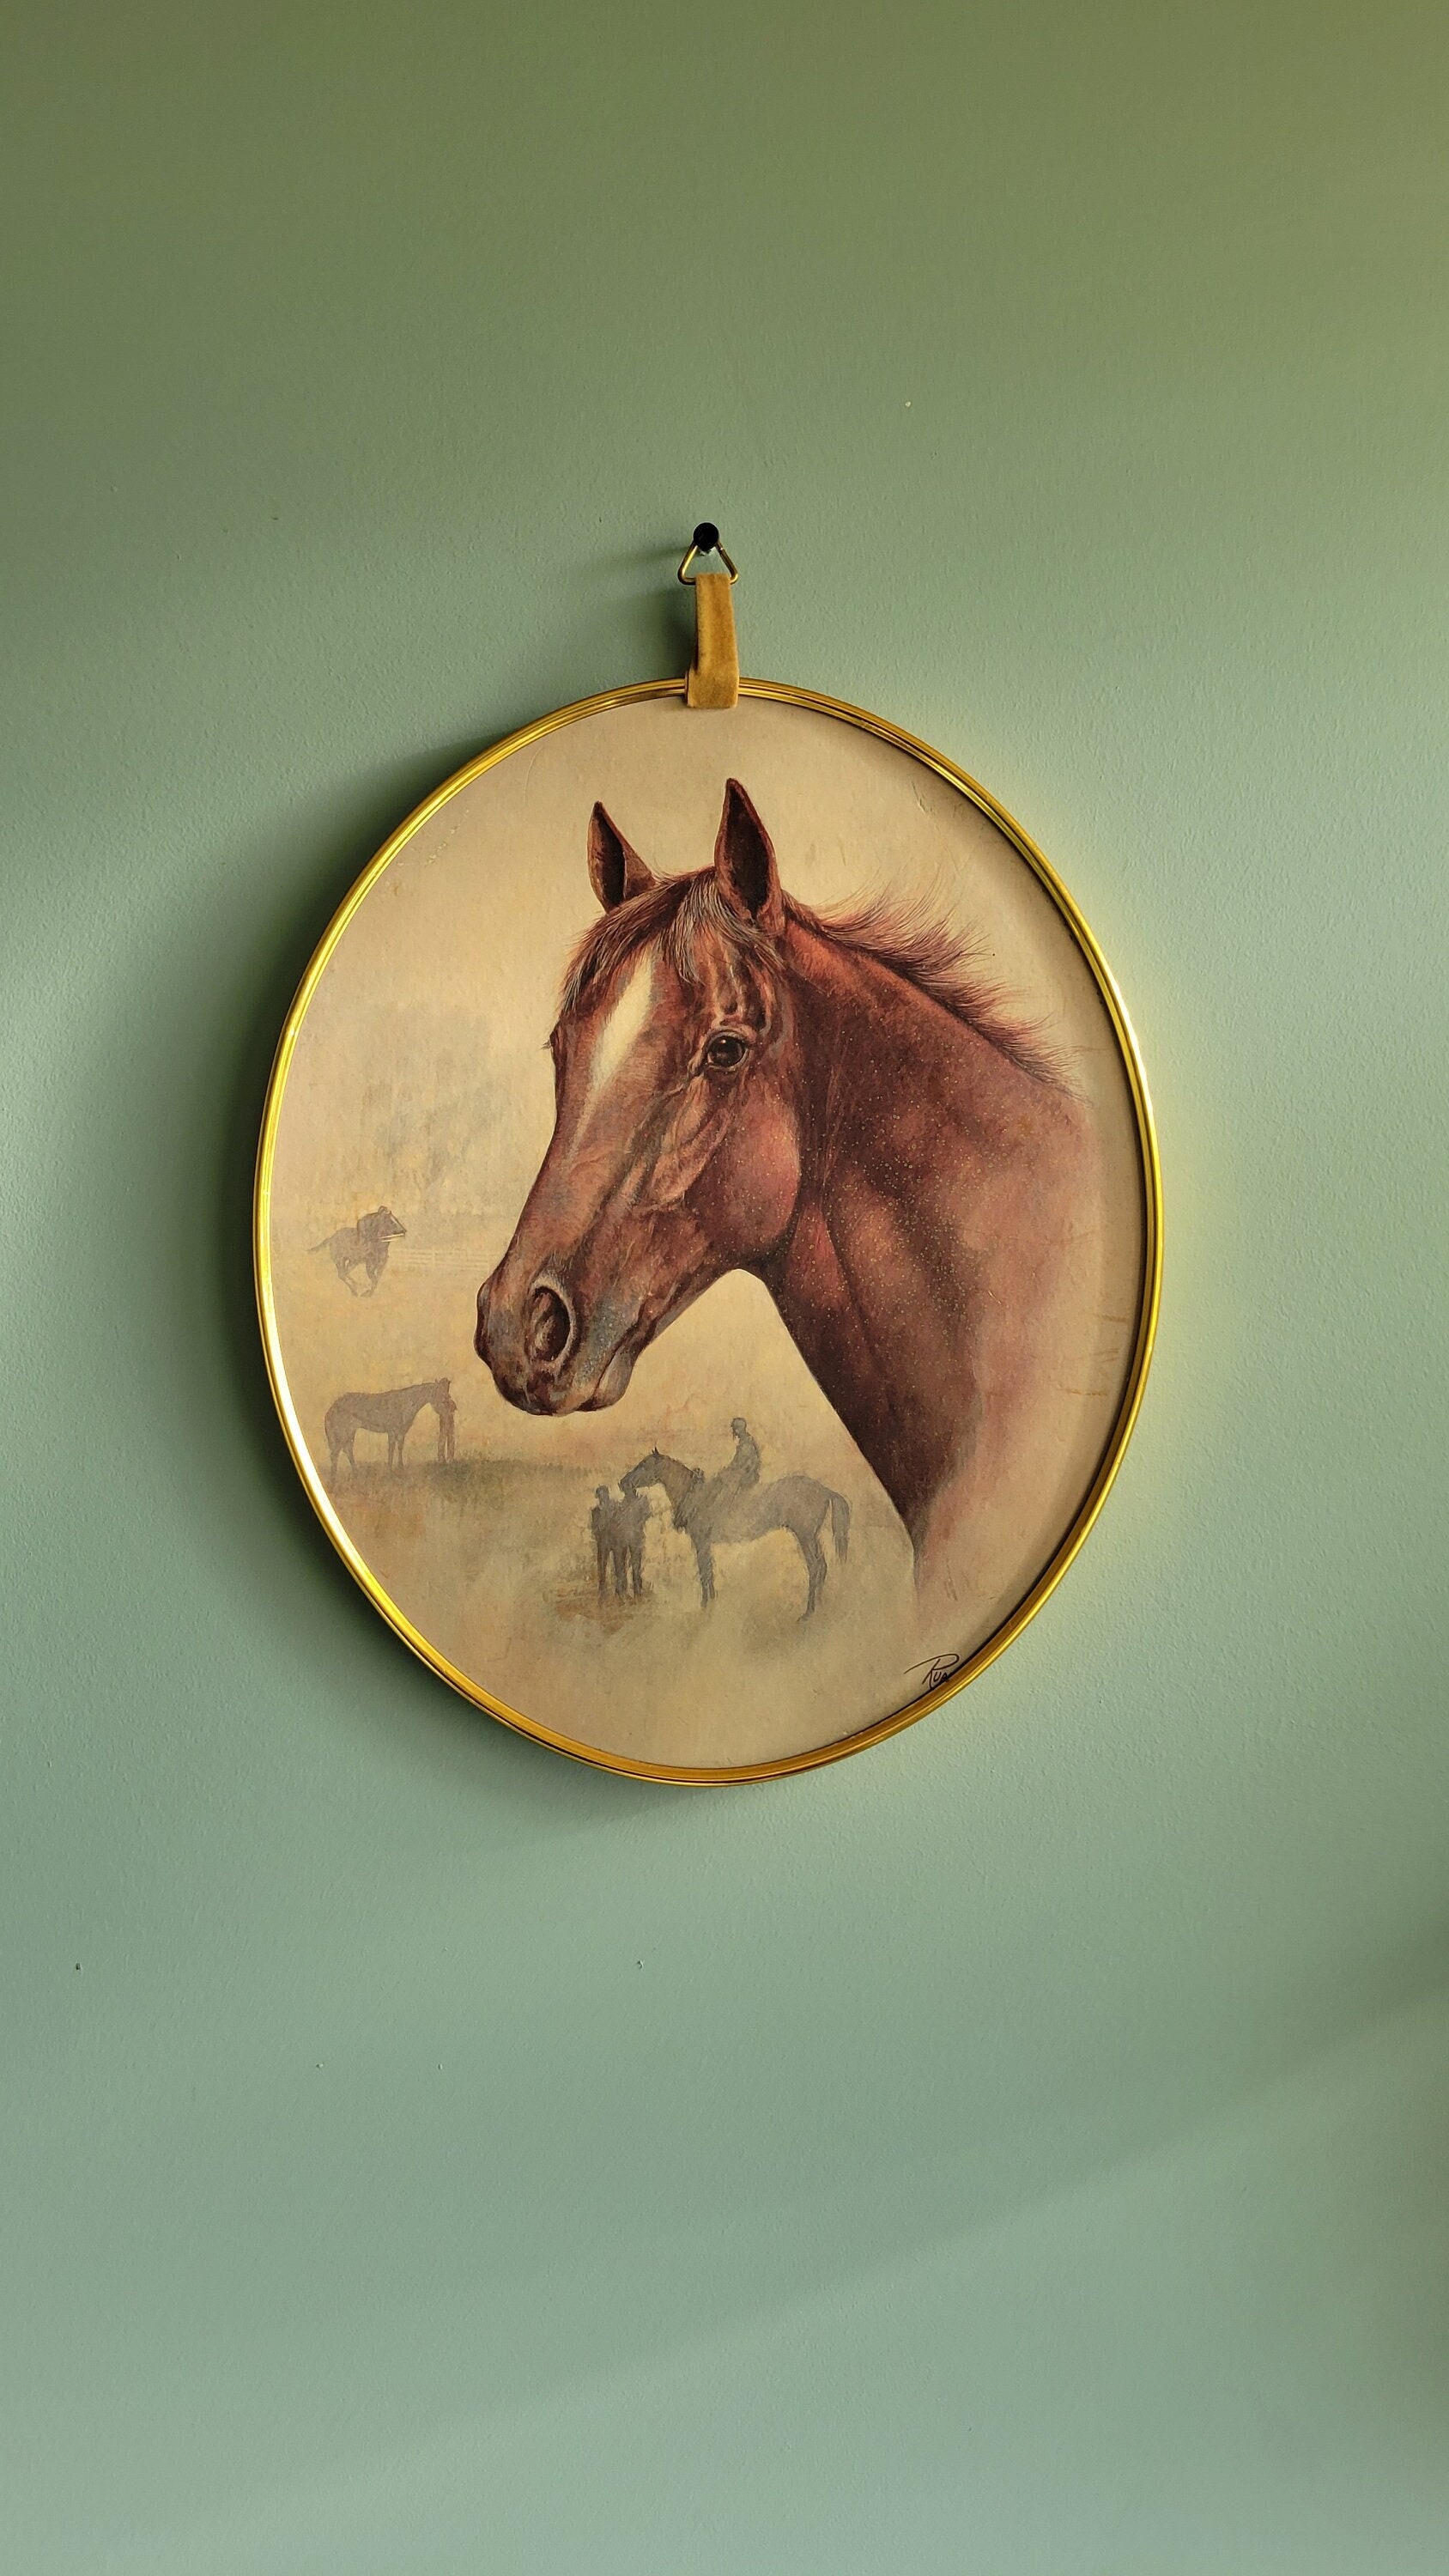 Completed Horse Diamond Painting